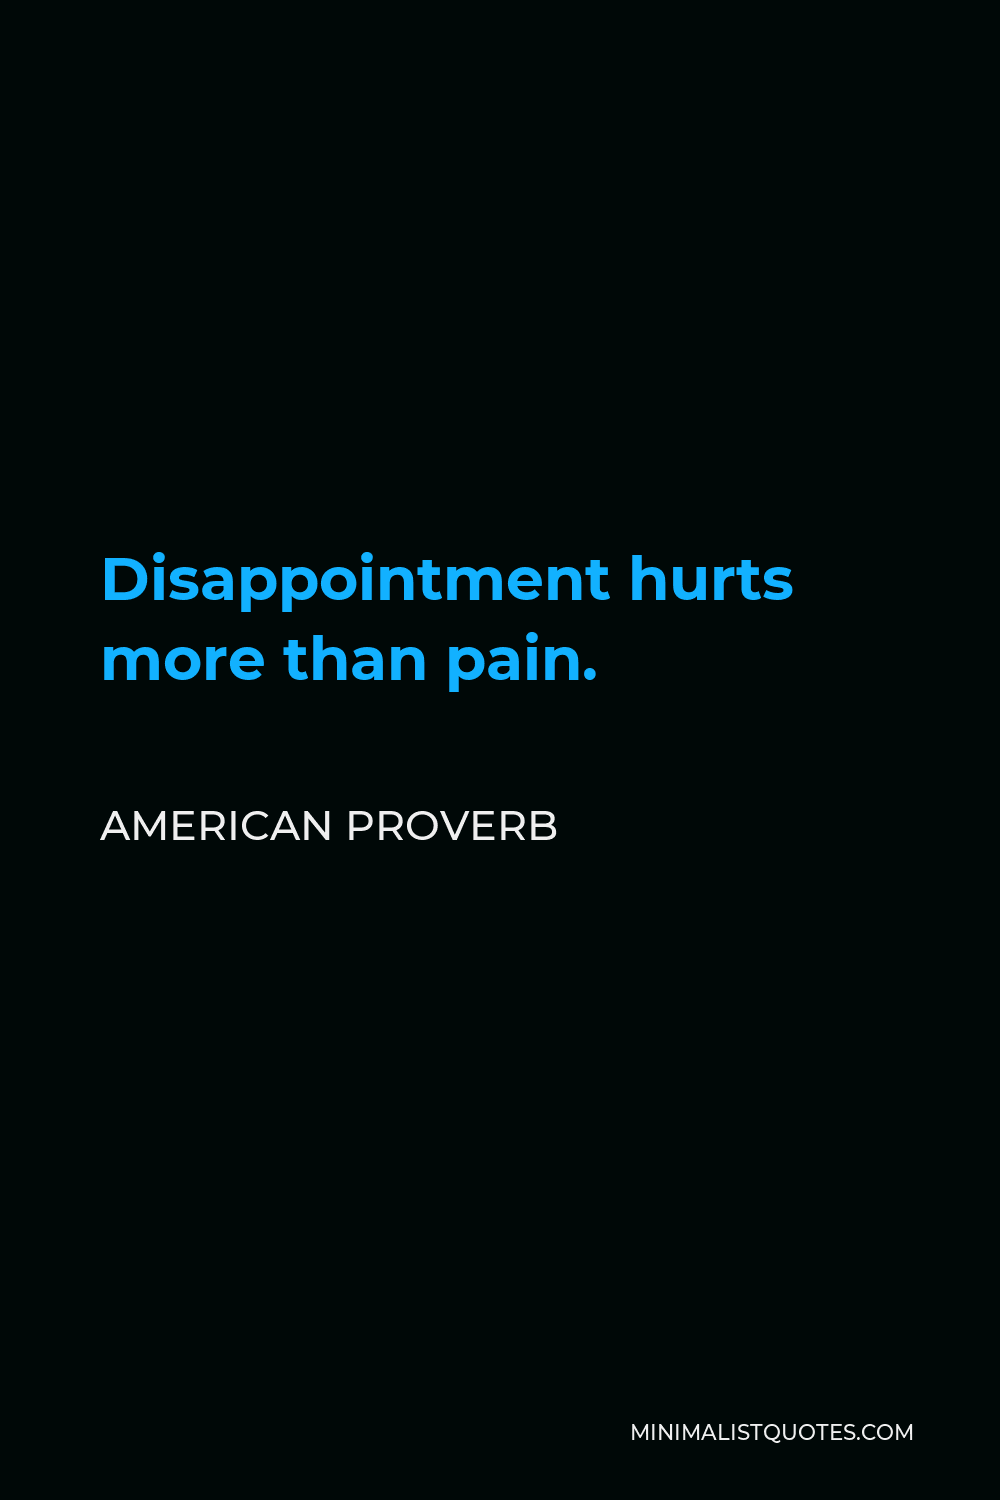 American Proverb Quote - Disappointment hurts more than pain.